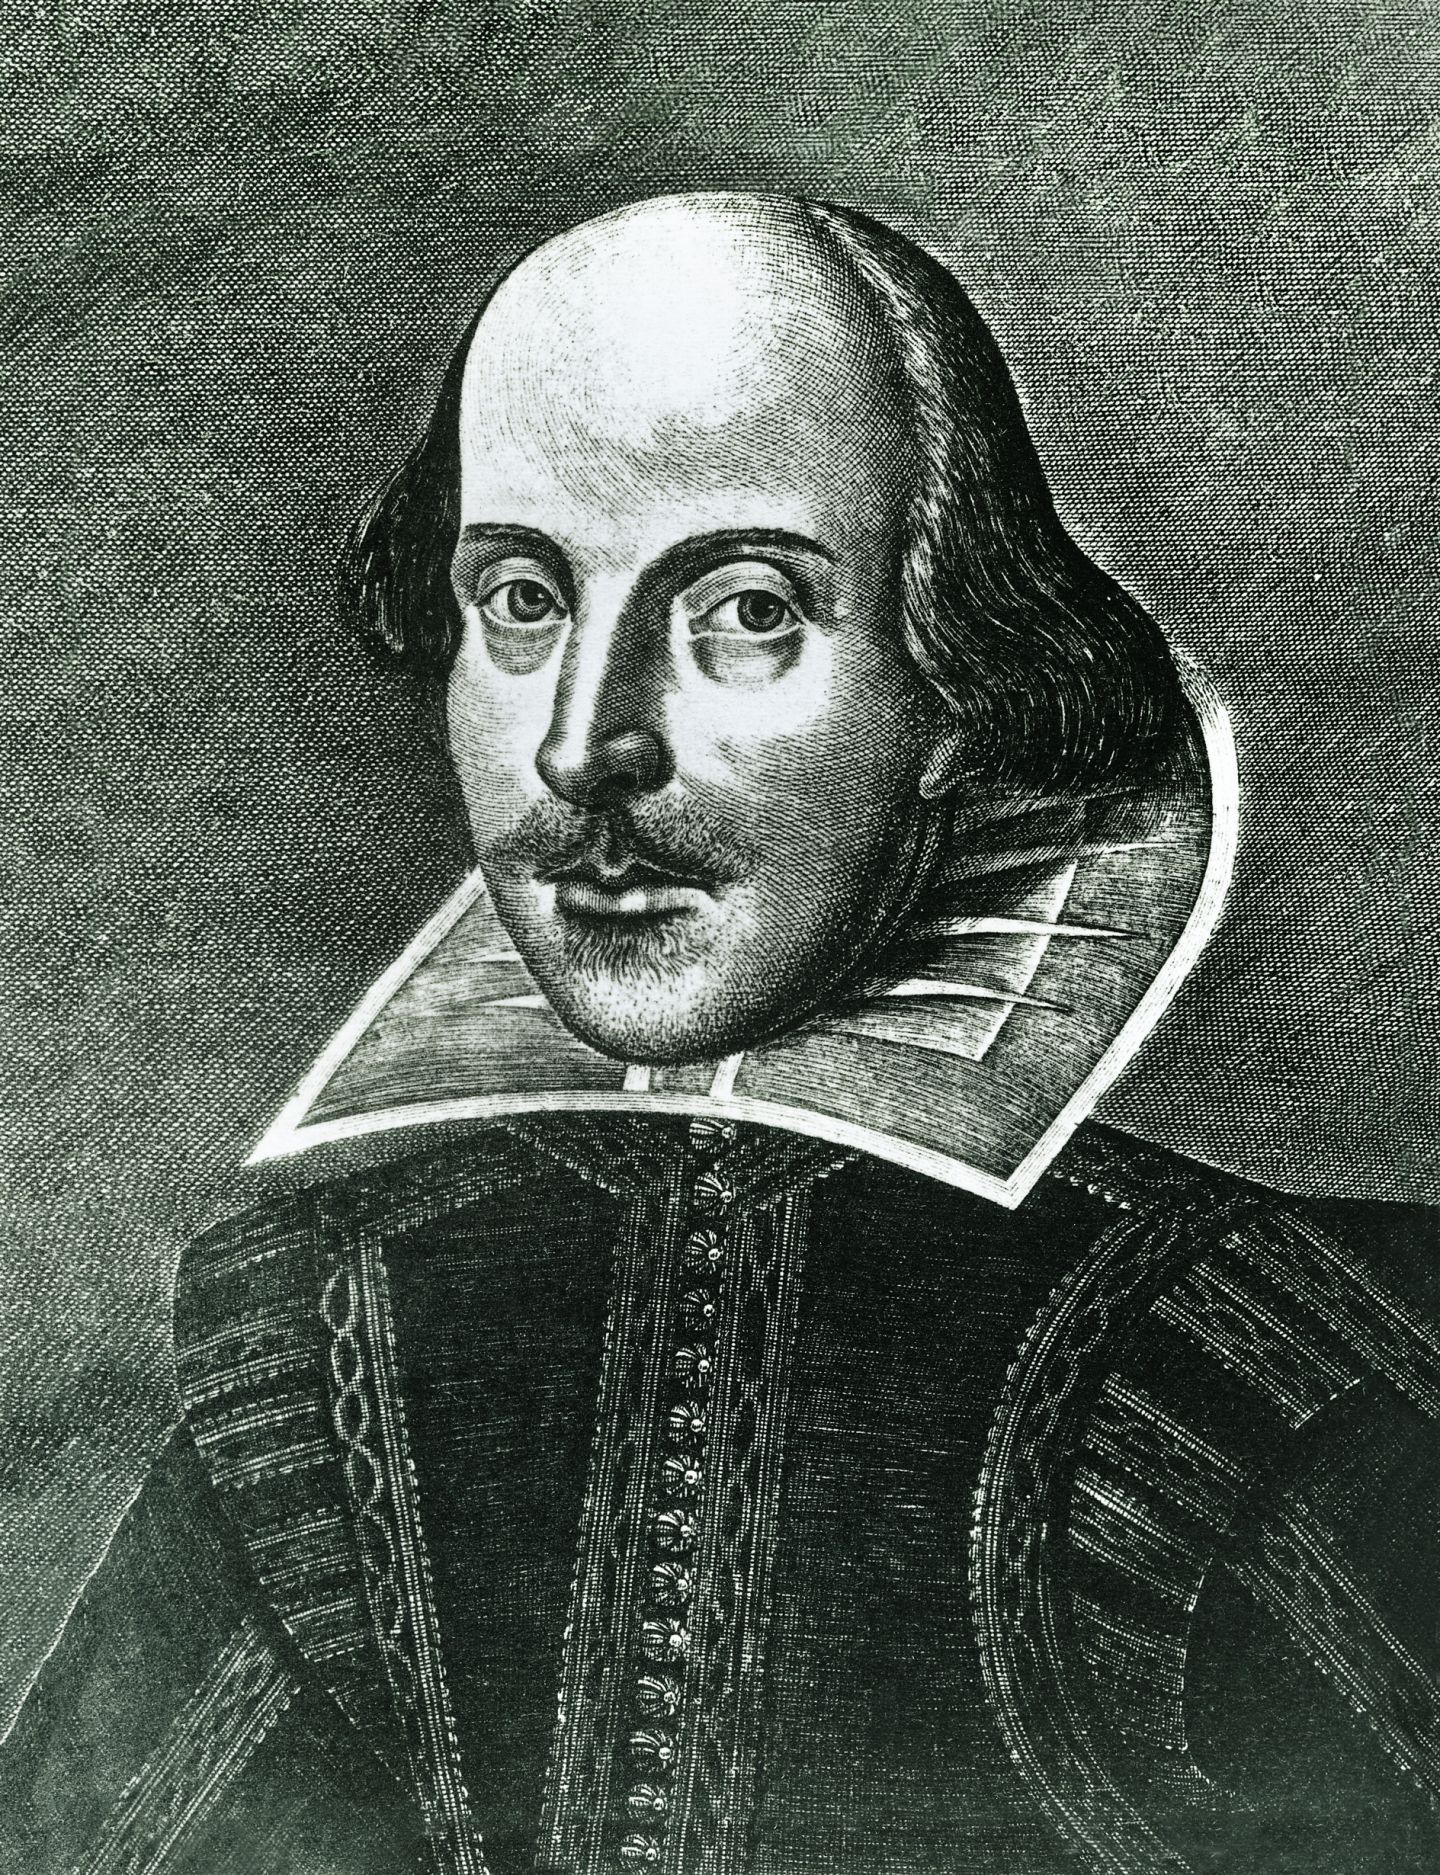 William Shakespeare Biography shakespeare Poems Books Poetry   Javatpoint